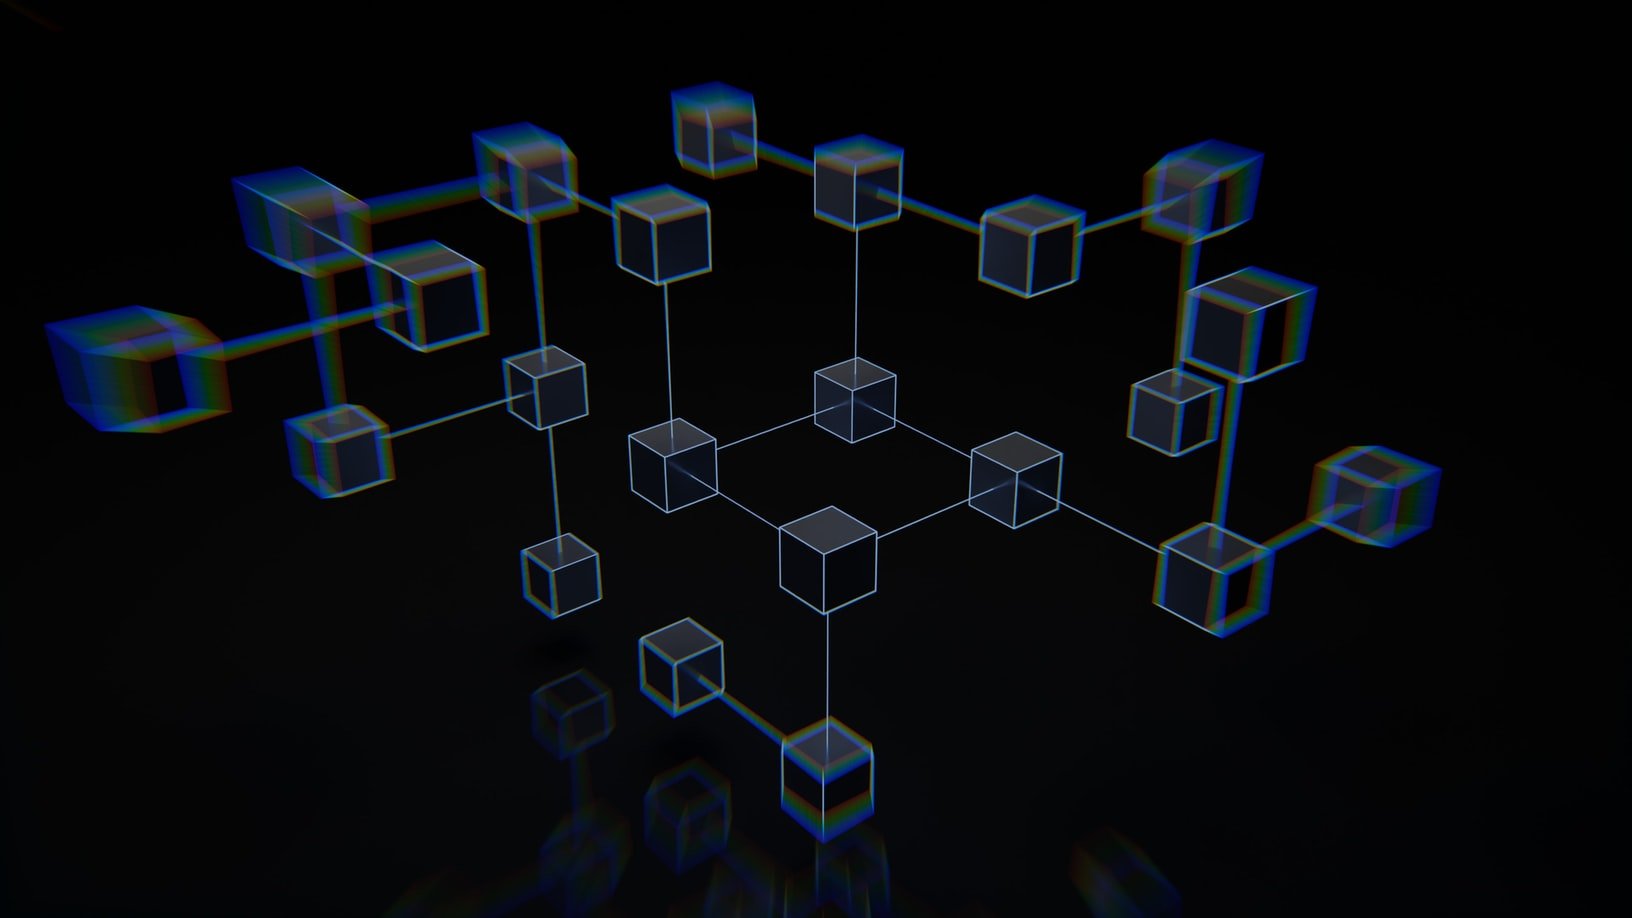 A conceptual representation of the blockchain, with black boxes connected via white lines against a black background.